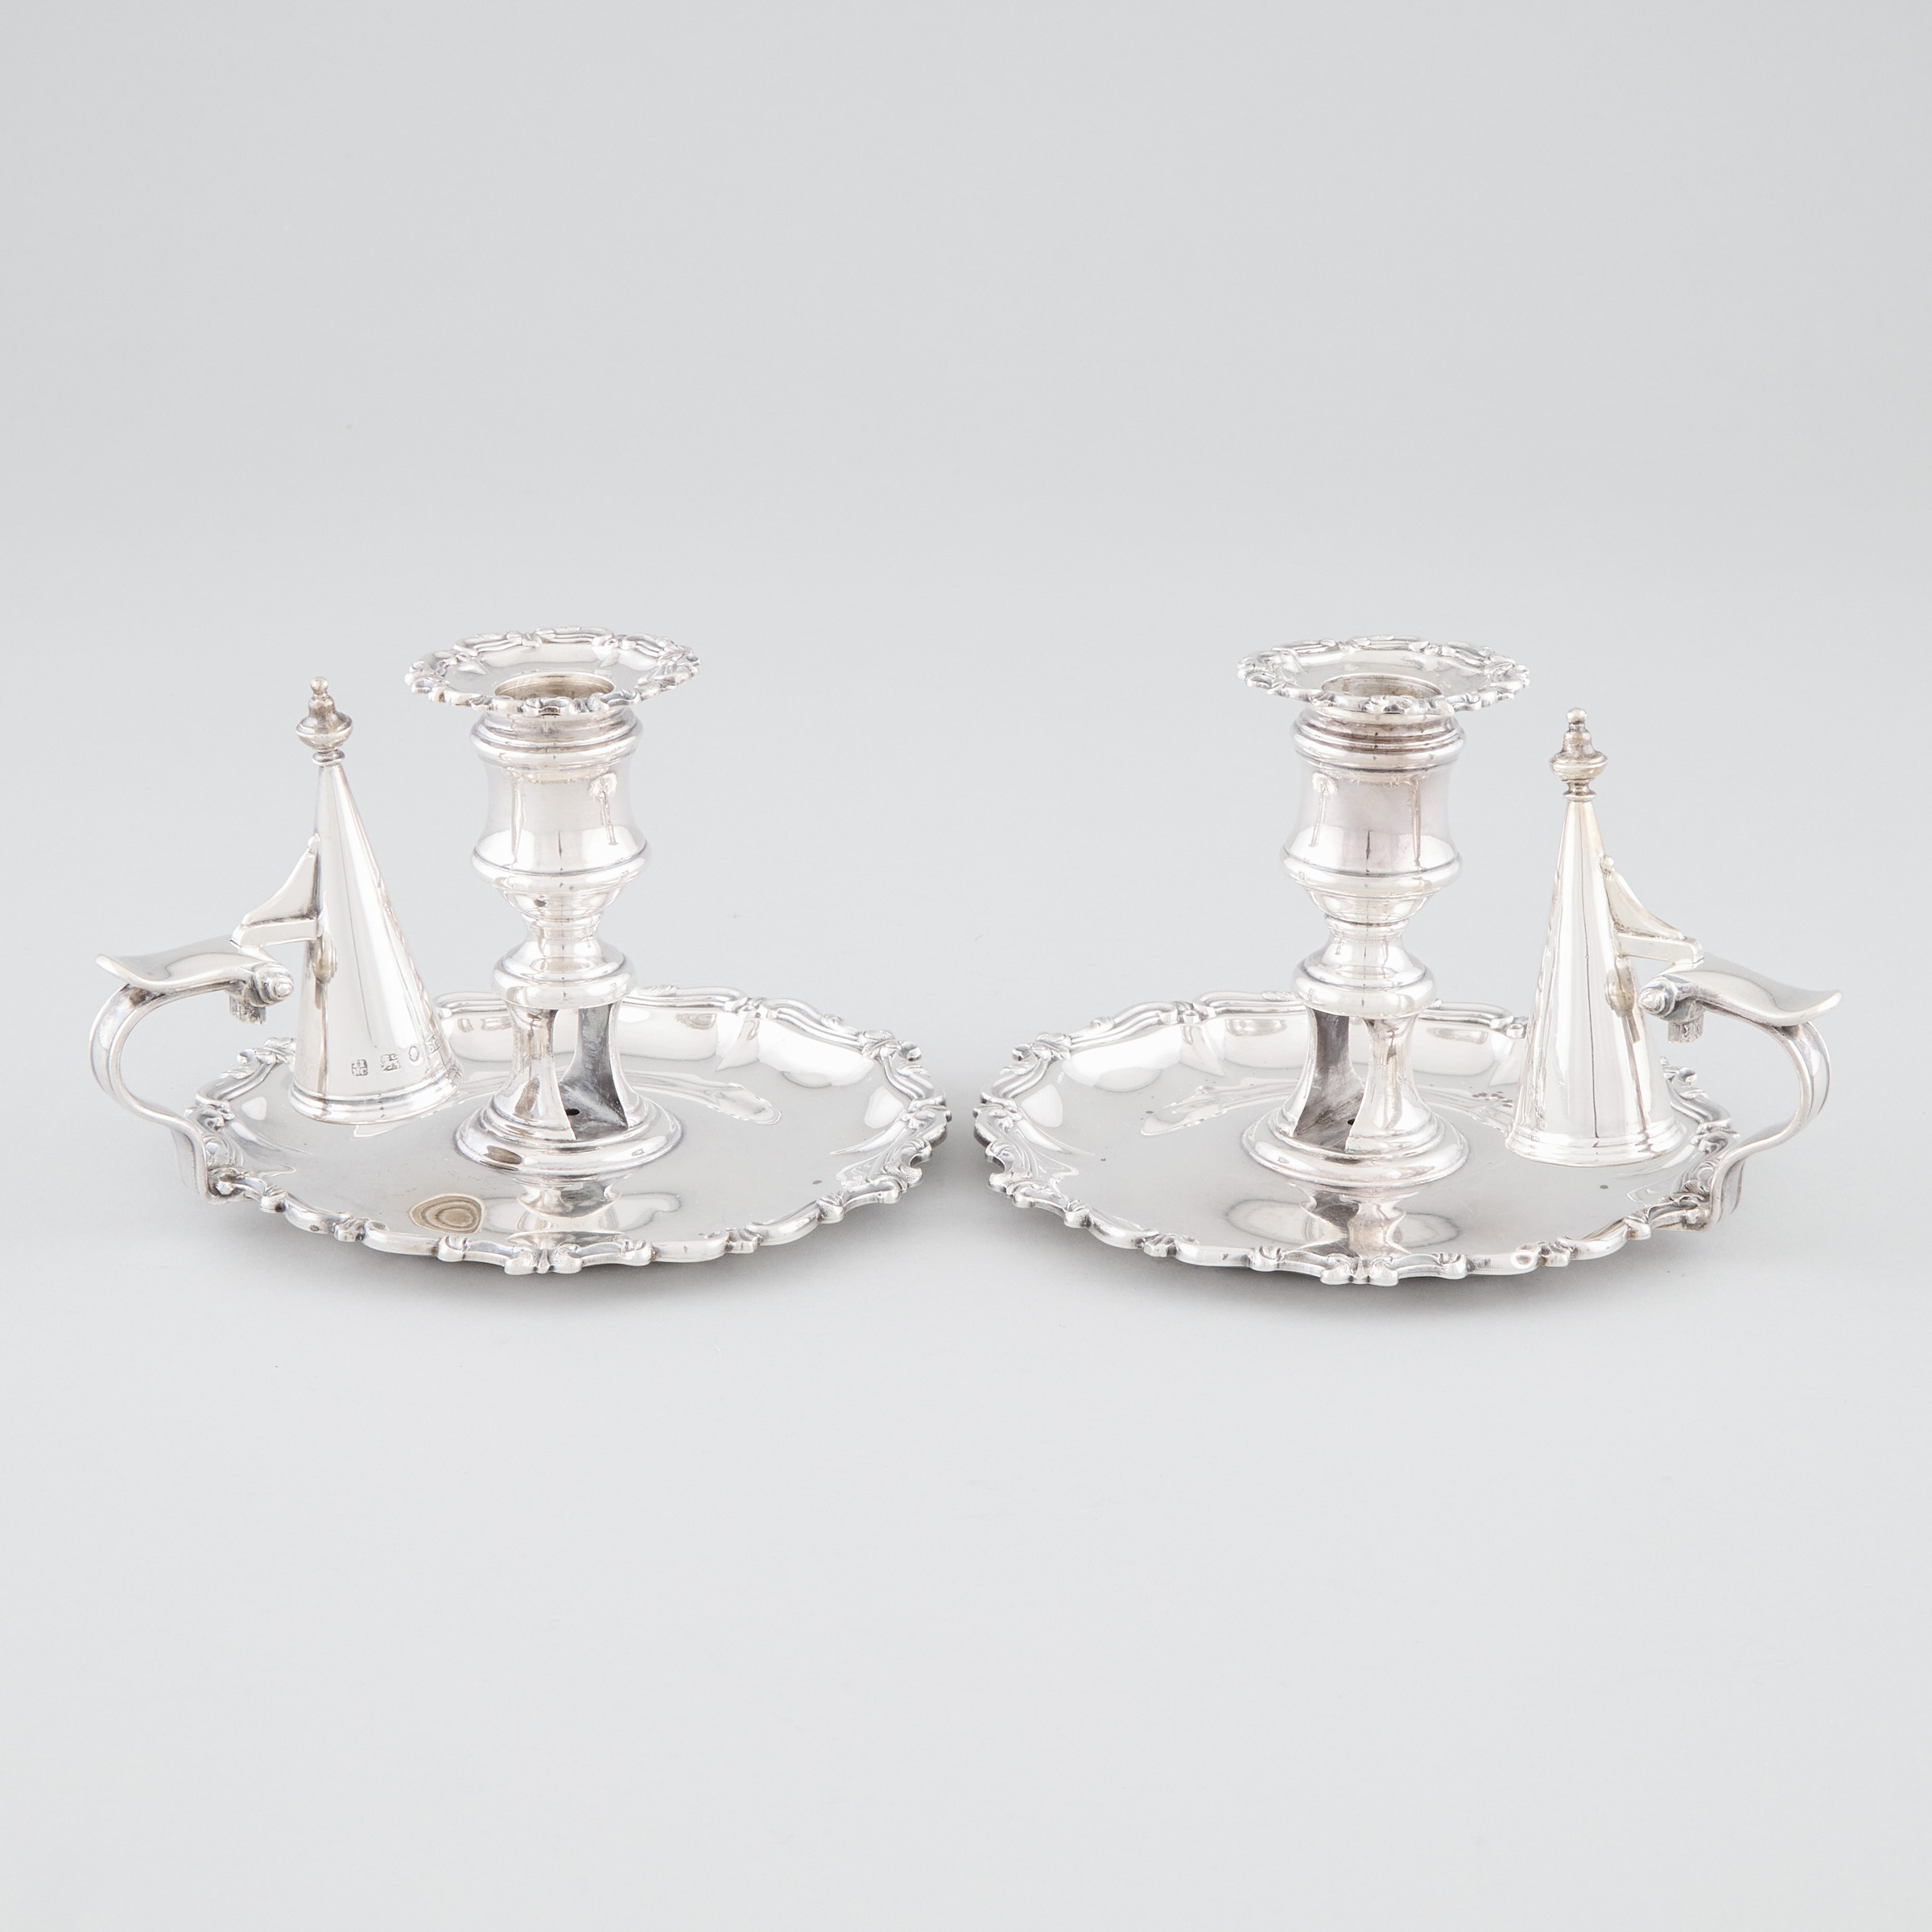 Pair of Early Victorian Silver